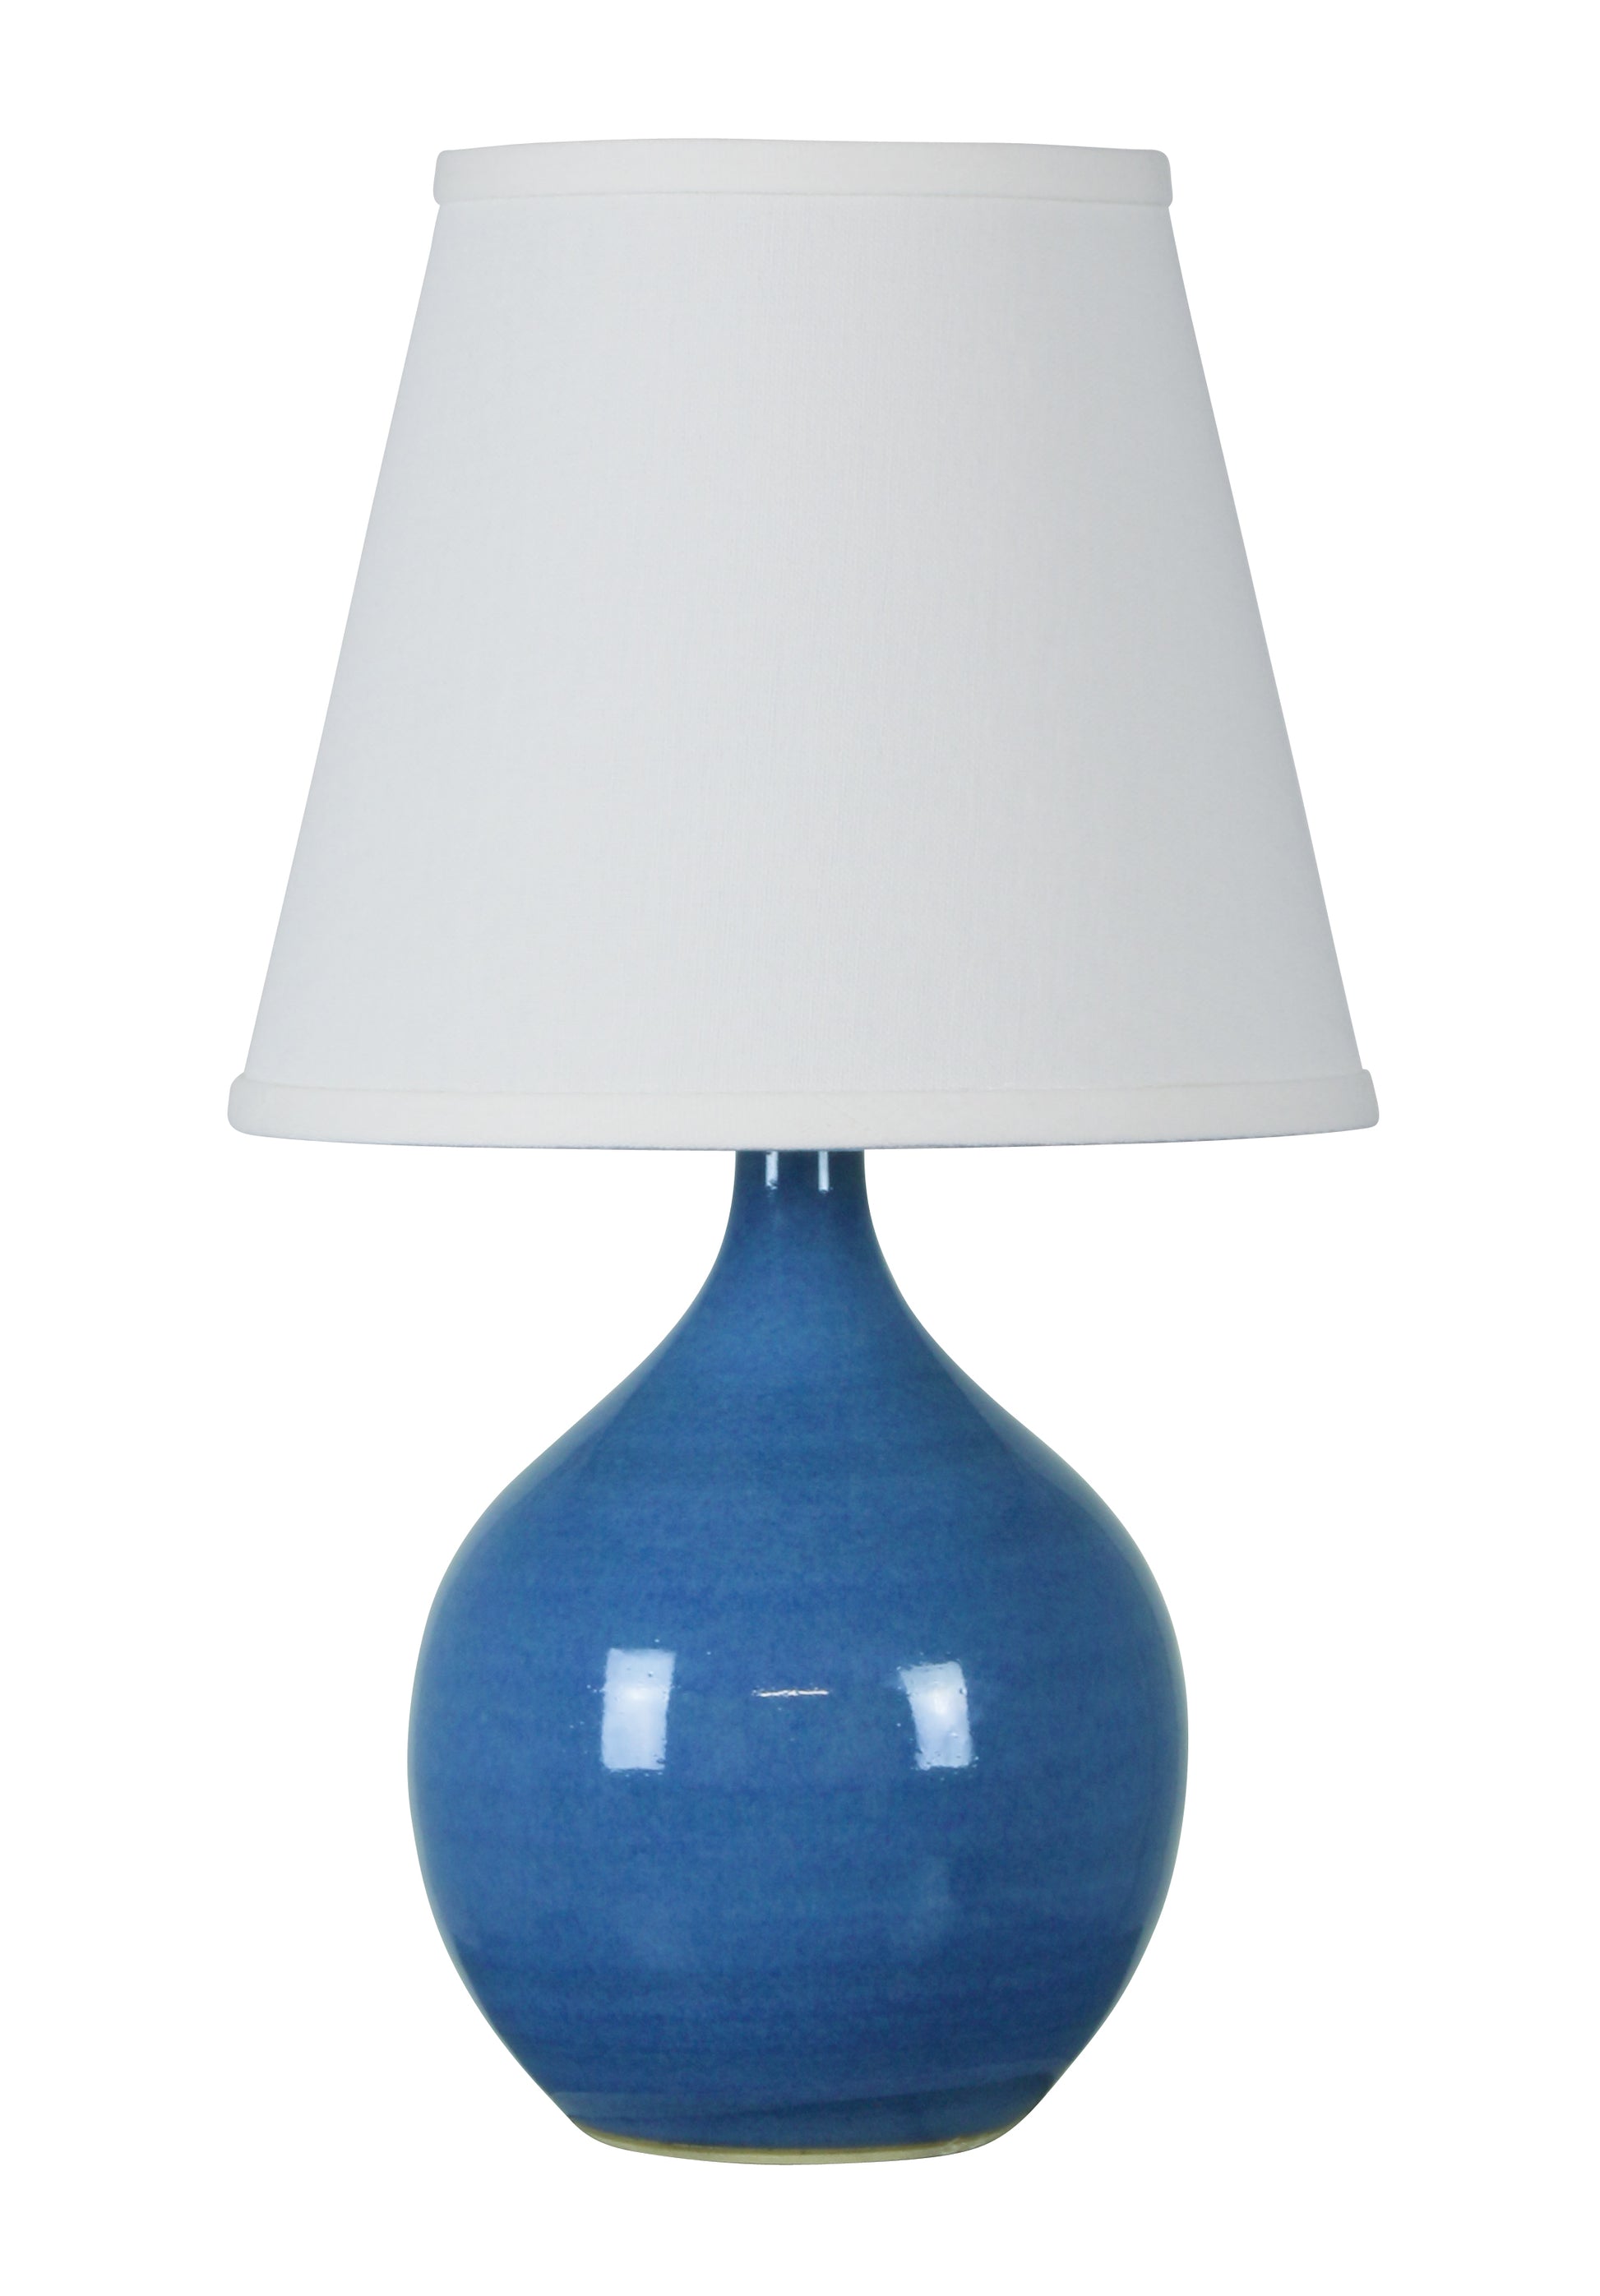 House of Troy Scatchard 13.5" Mini Accent Lamp in Cornflower Blue GS50-CB